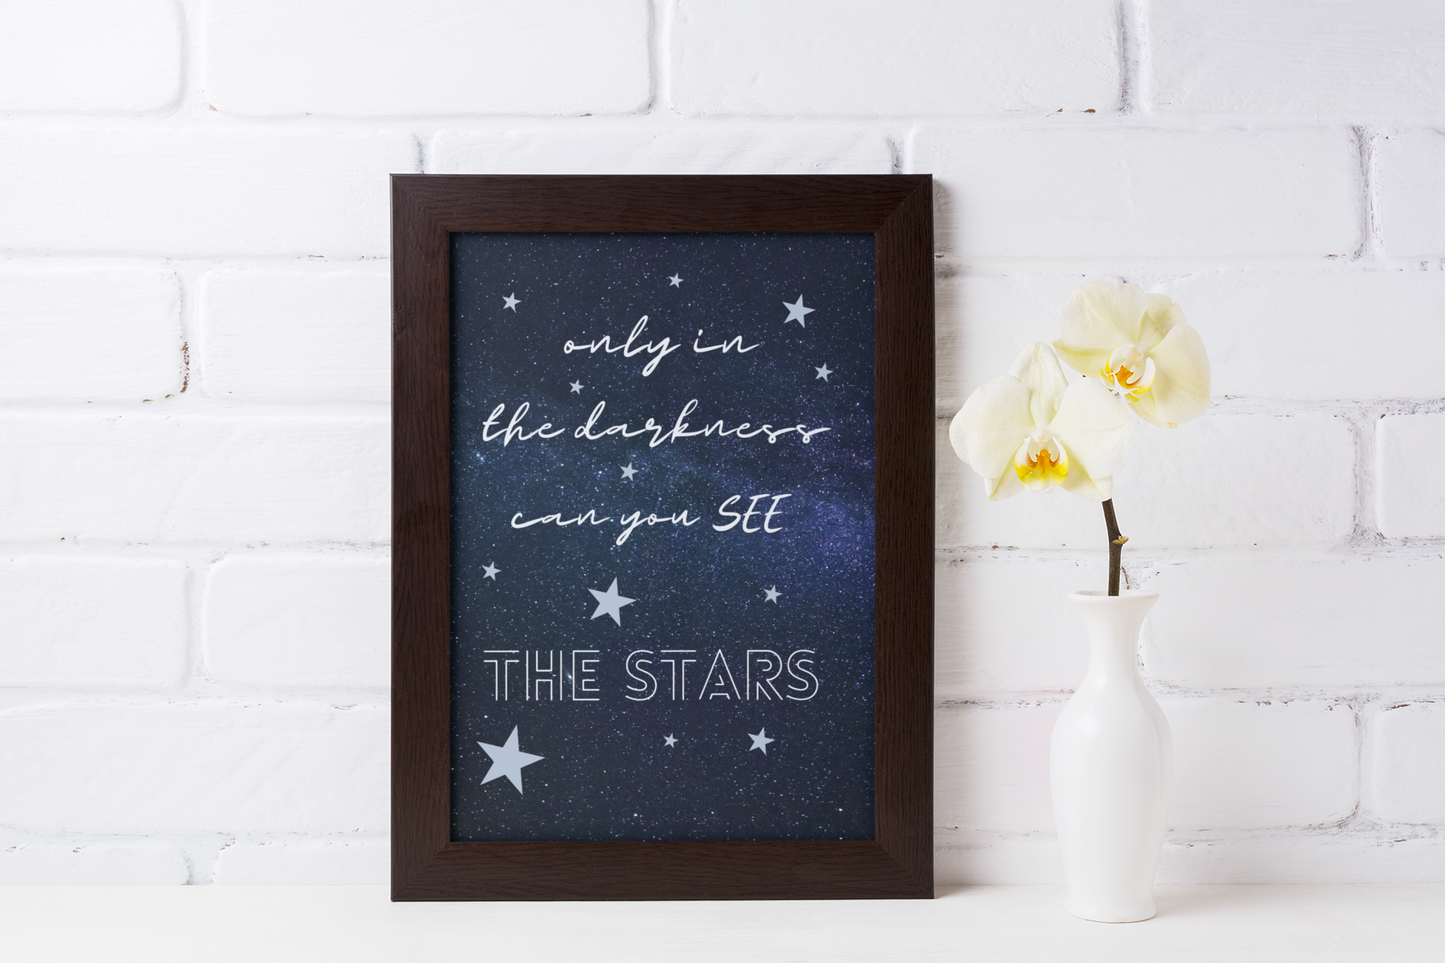 STAR AFFIRMATION 1 - QUIRKY UNIQUE WALL ART featuring Stars and a positive affirmation to remember through the ups and downs of everyday challenges.